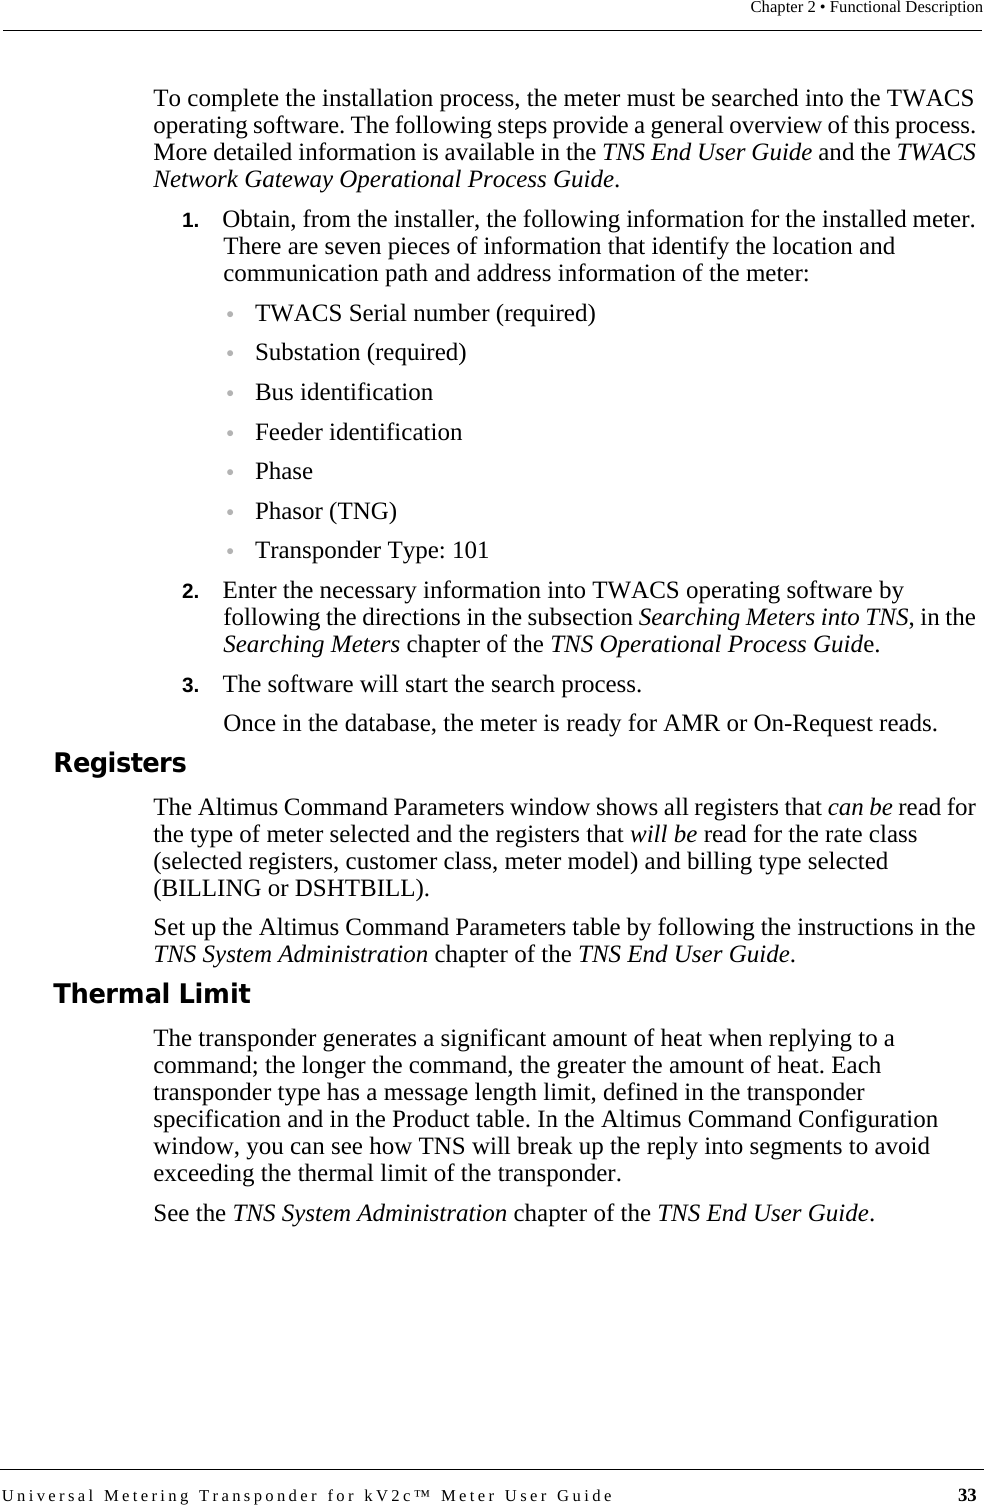 Universal Metering Transponder for kV2c™ Meter User Guide  33Chapter 2 • Functional DescriptionTo complete the installation process, the meter must be searched into the TWACS operating software. The following steps provide a general overview of this process. More detailed information is available in the TNS End User Guide and the TWACS Network Gateway Operational Process Guide.1.   Obtain, from the installer, the following information for the installed meter. There are seven pieces of information that identify the location and communication path and address information of the meter:•TWACS Serial number (required)•Substation (required)•Bus identification•Feeder identification•Phase•Phasor (TNG)•Transponder Type: 1012.   Enter the necessary information into TWACS operating software by following the directions in the subsection Searching Meters into TNS, in the Searching Meters chapter of the TNS Operational Process Guide.3.   The software will start the search process.Once in the database, the meter is ready for AMR or On-Request reads. RegistersThe Altimus Command Parameters window shows all registers that can be read for the type of meter selected and the registers that will be read for the rate class (selected registers, customer class, meter model) and billing type selected (BILLING or DSHTBILL). Set up the Altimus Command Parameters table by following the instructions in the TNS System Administration chapter of the TNS End User Guide.Thermal LimitThe transponder generates a significant amount of heat when replying to a command; the longer the command, the greater the amount of heat. Each transponder type has a message length limit, defined in the transponder specification and in the Product table. In the Altimus Command Configuration window, you can see how TNS will break up the reply into segments to avoid exceeding the thermal limit of the transponder.See the TNS System Administration chapter of the TNS End User Guide.